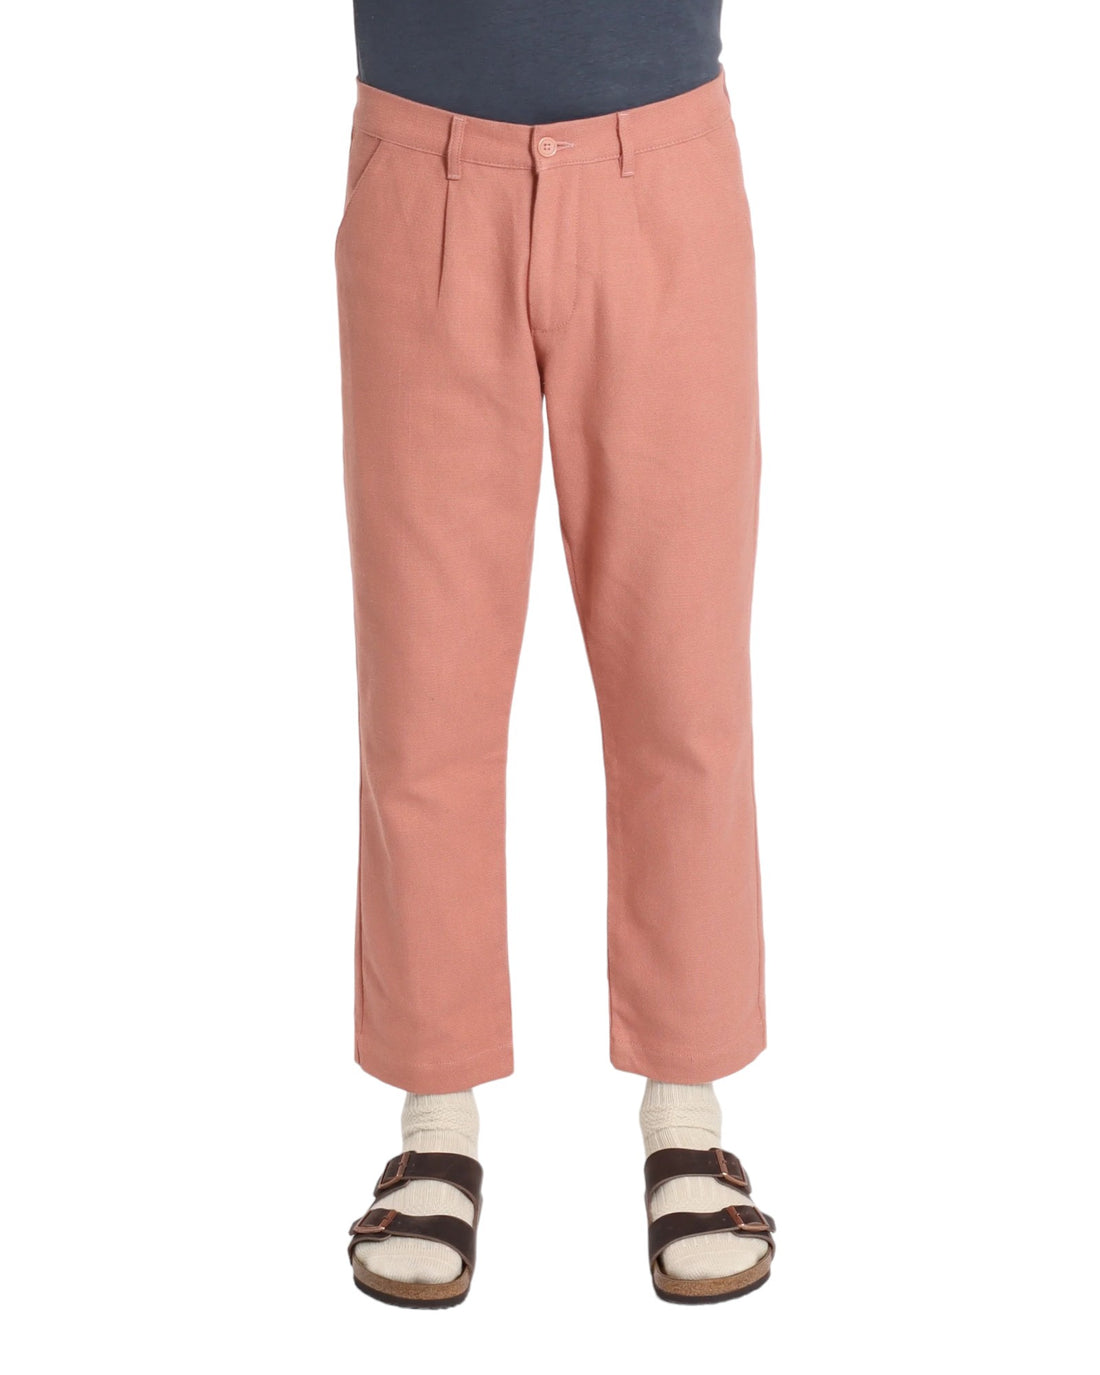 RYDER TEXTURED WEAVE TROUSER